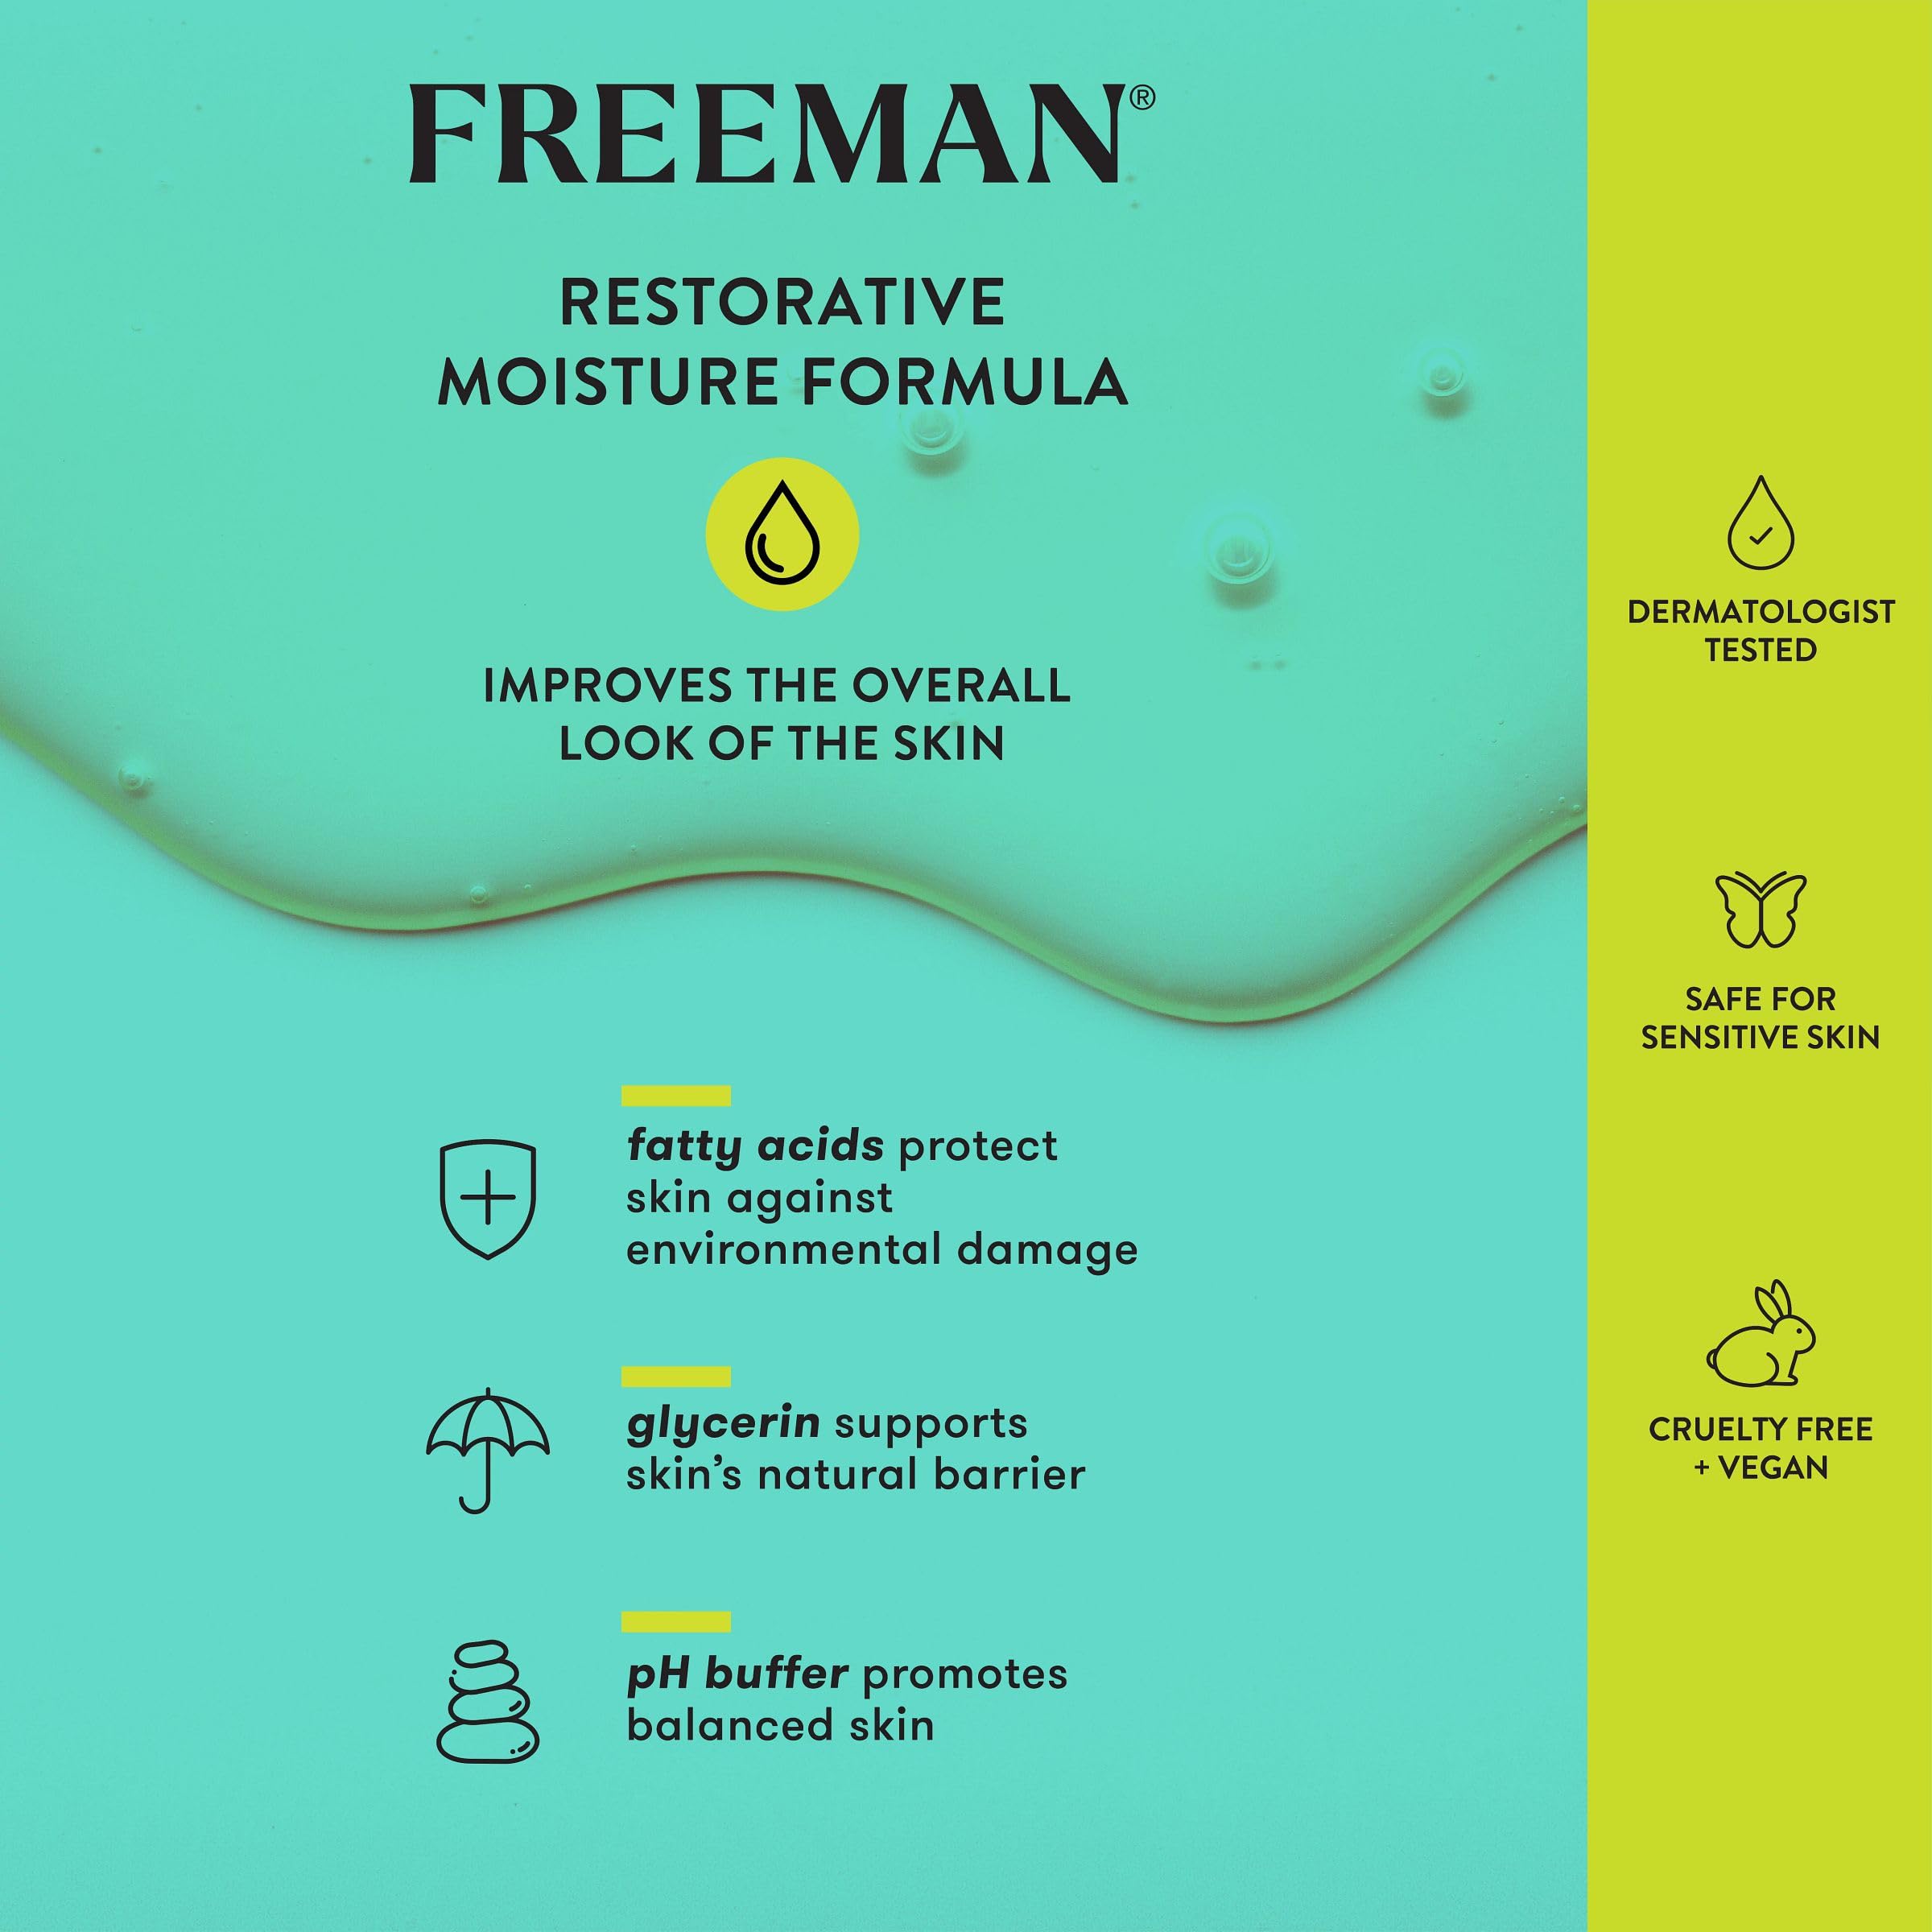 FREEMAN Restorative Facial Cleanser + Mask, Moisturizing & Purifying Cream-To-Foam Face Wash, Multipurpose Skincare to Deep Clean, AHA's & Botanical Extracts Face Mask, 3 fl.oz./ 89 mL Tube